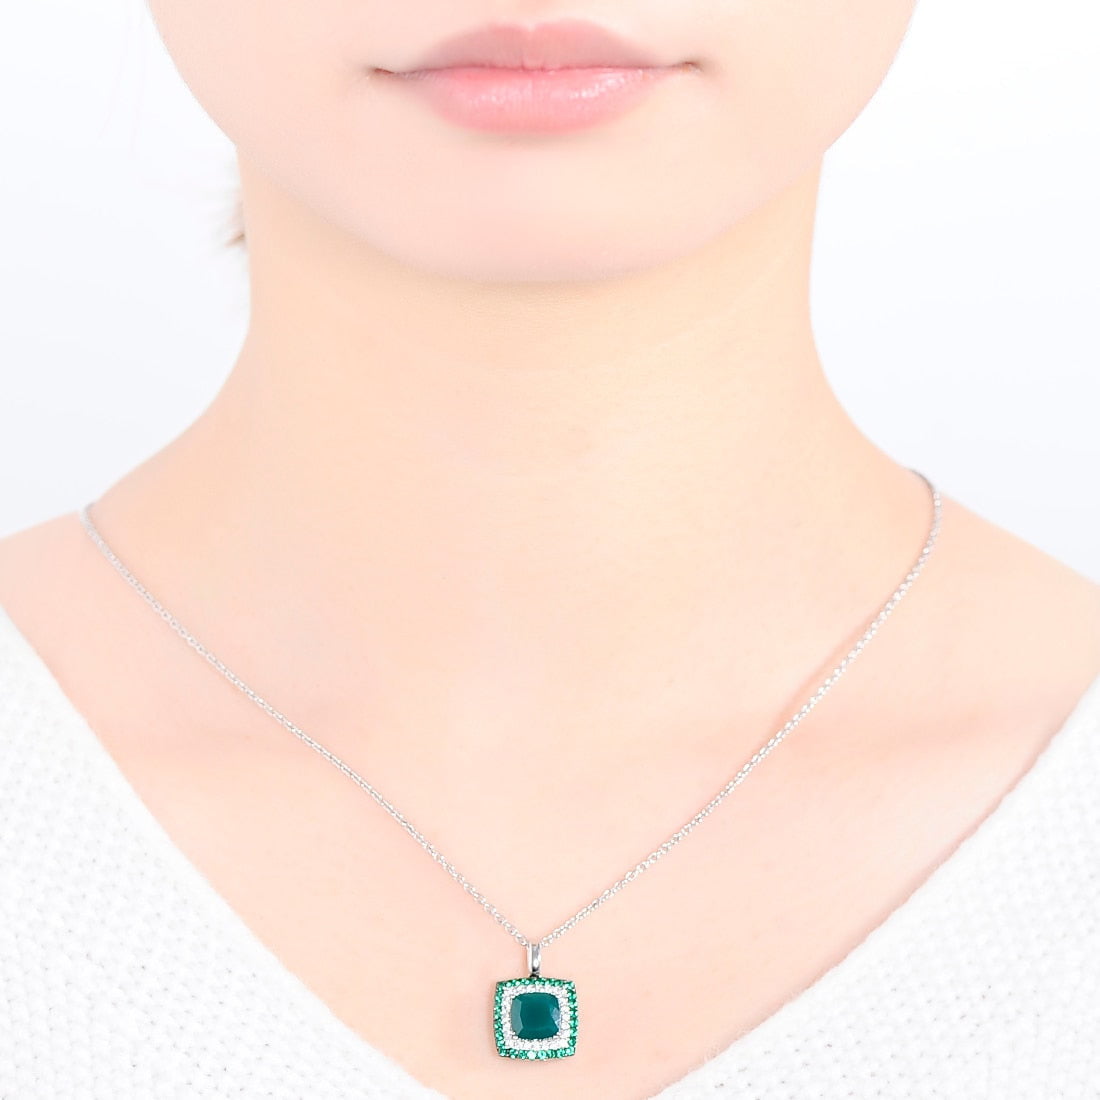 Balchik Pendant (Necklace not Included) - ANN VOYAGE